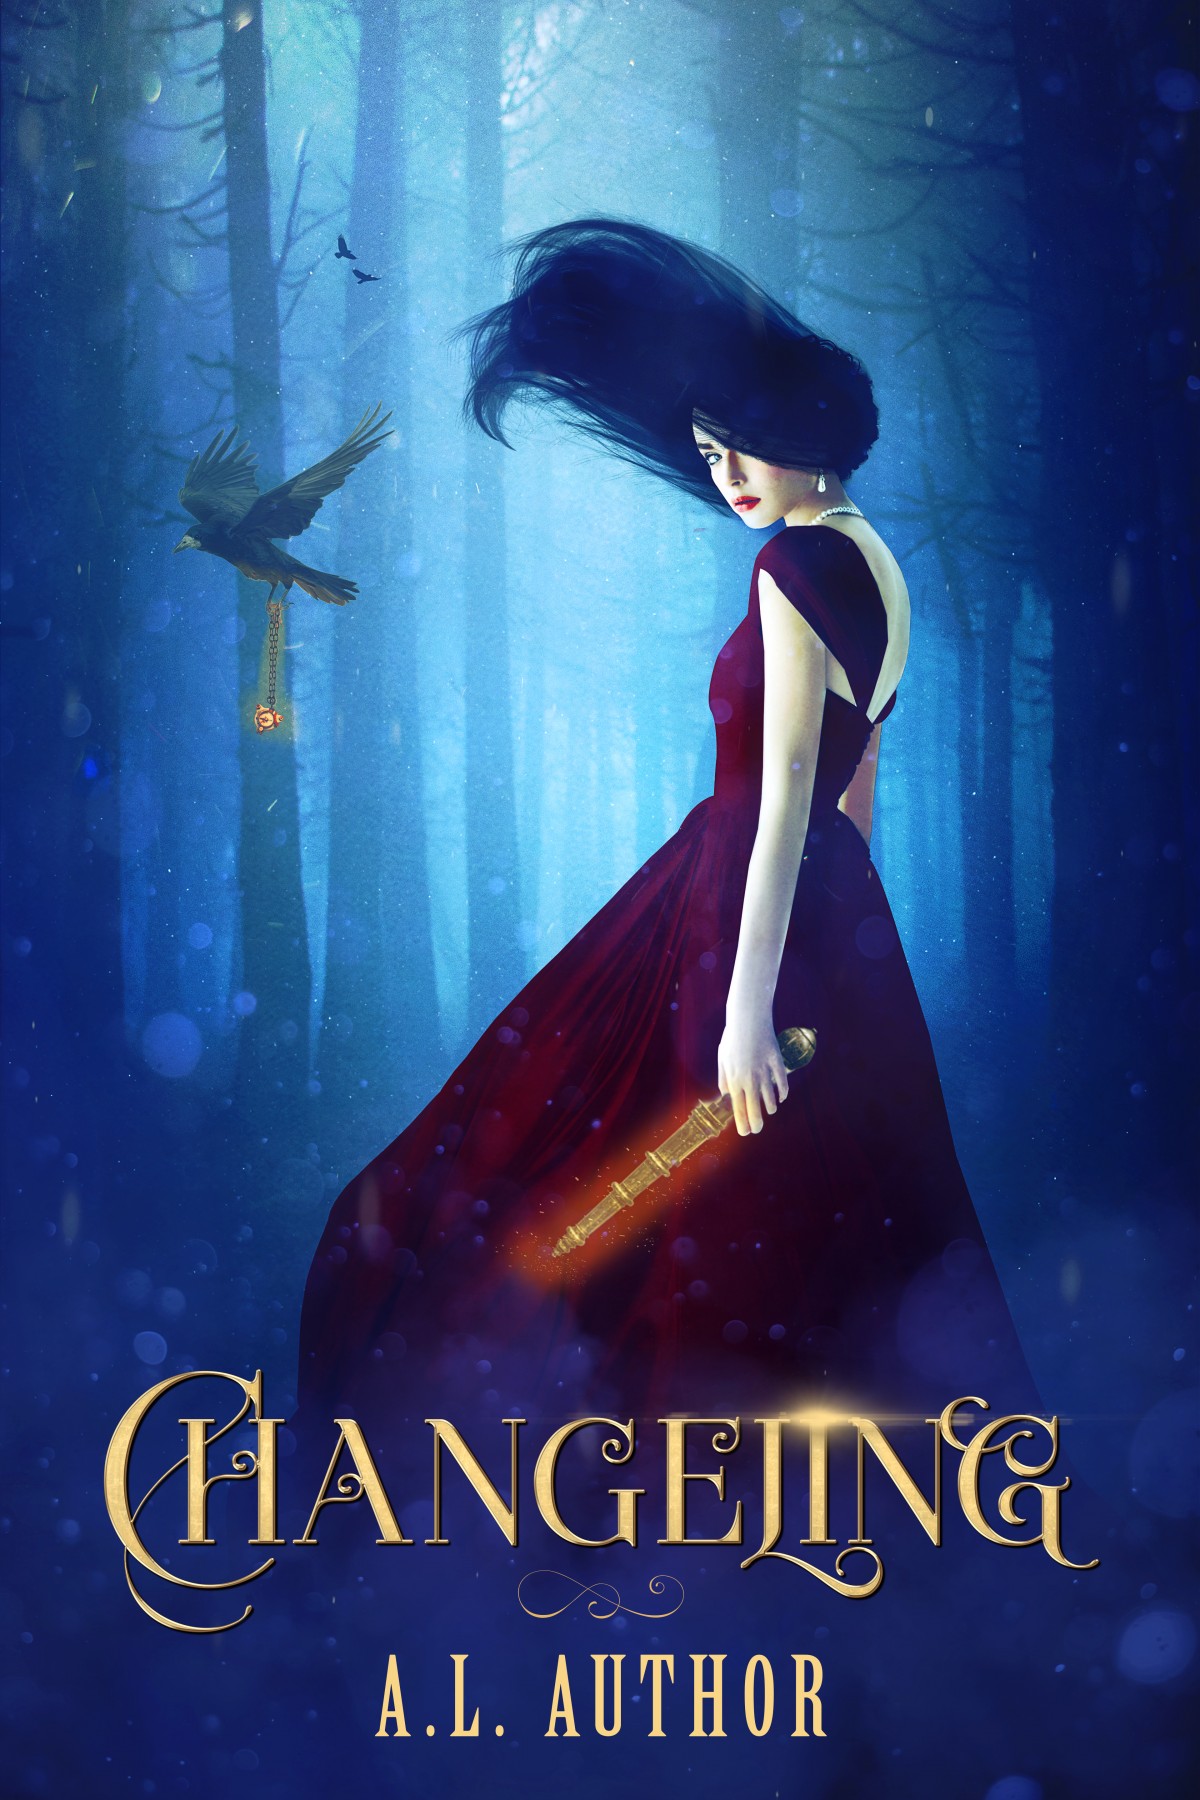 Changeling - The Book Cover Designer